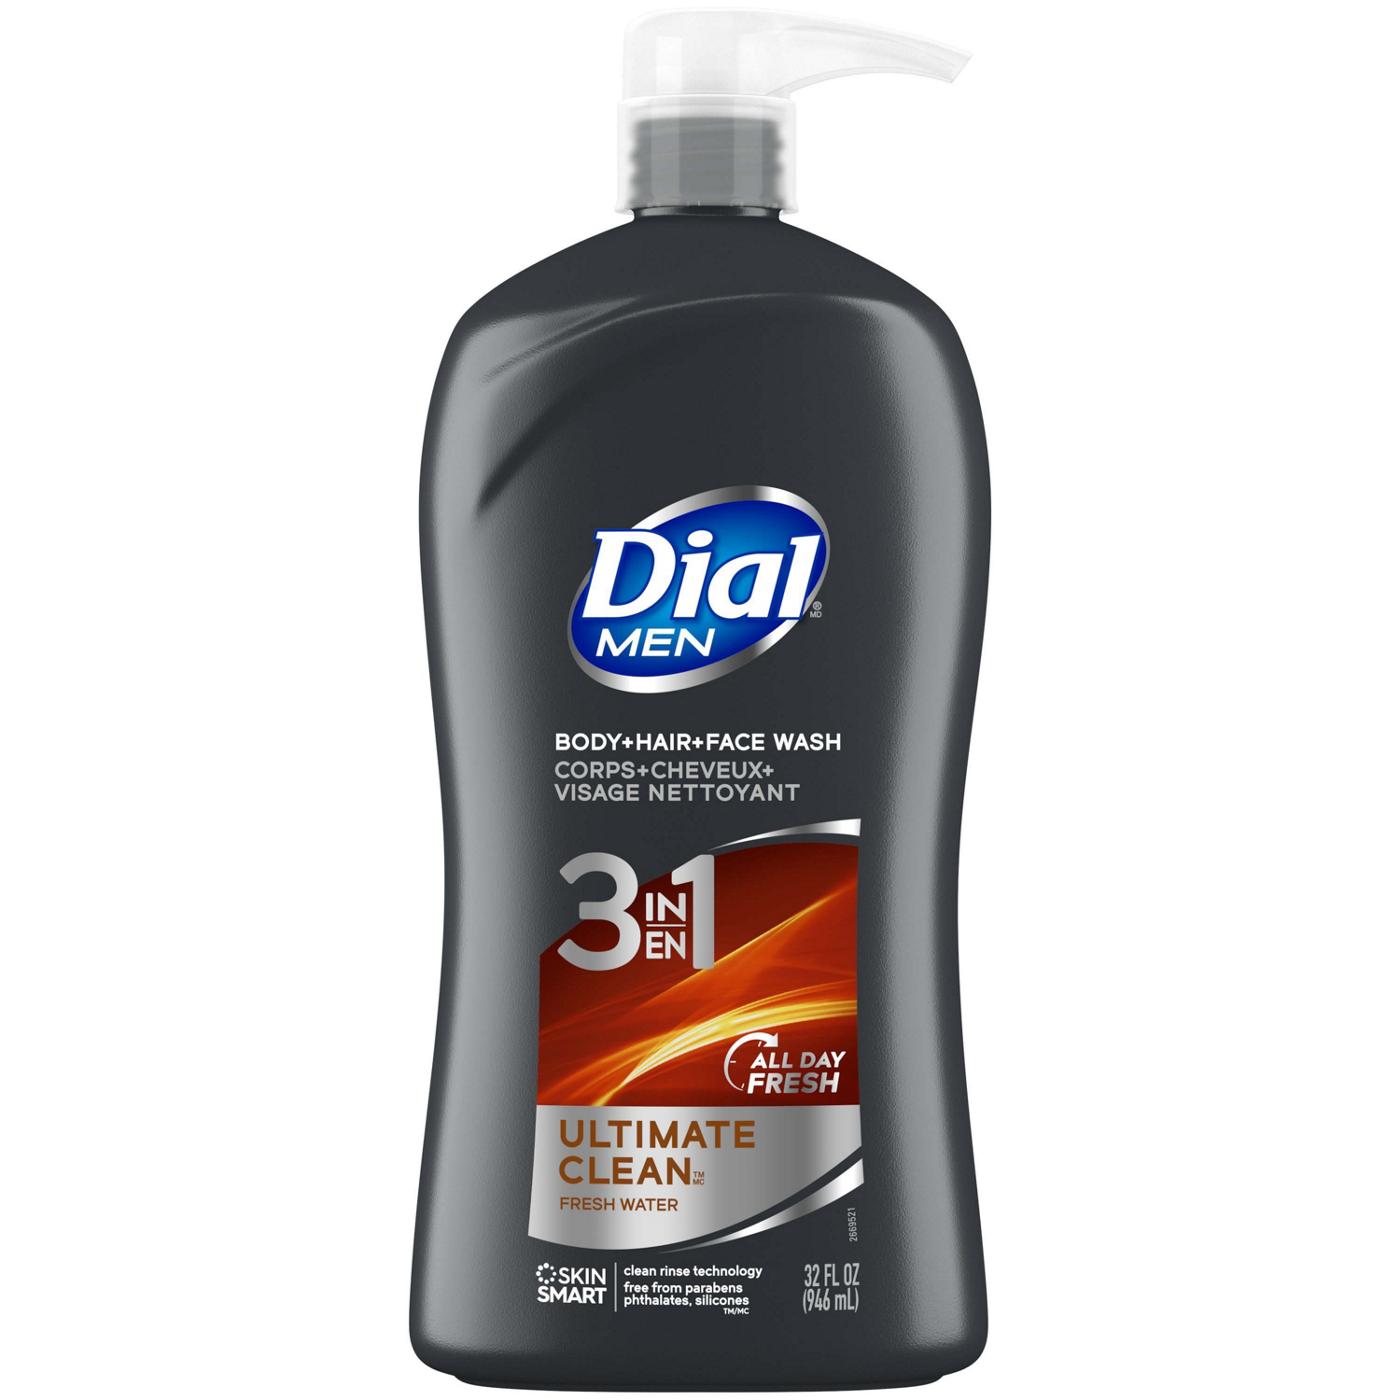 Dial Men 3in1 Body, Hair and Face Wash - Ultimate Clean; image 1 of 3